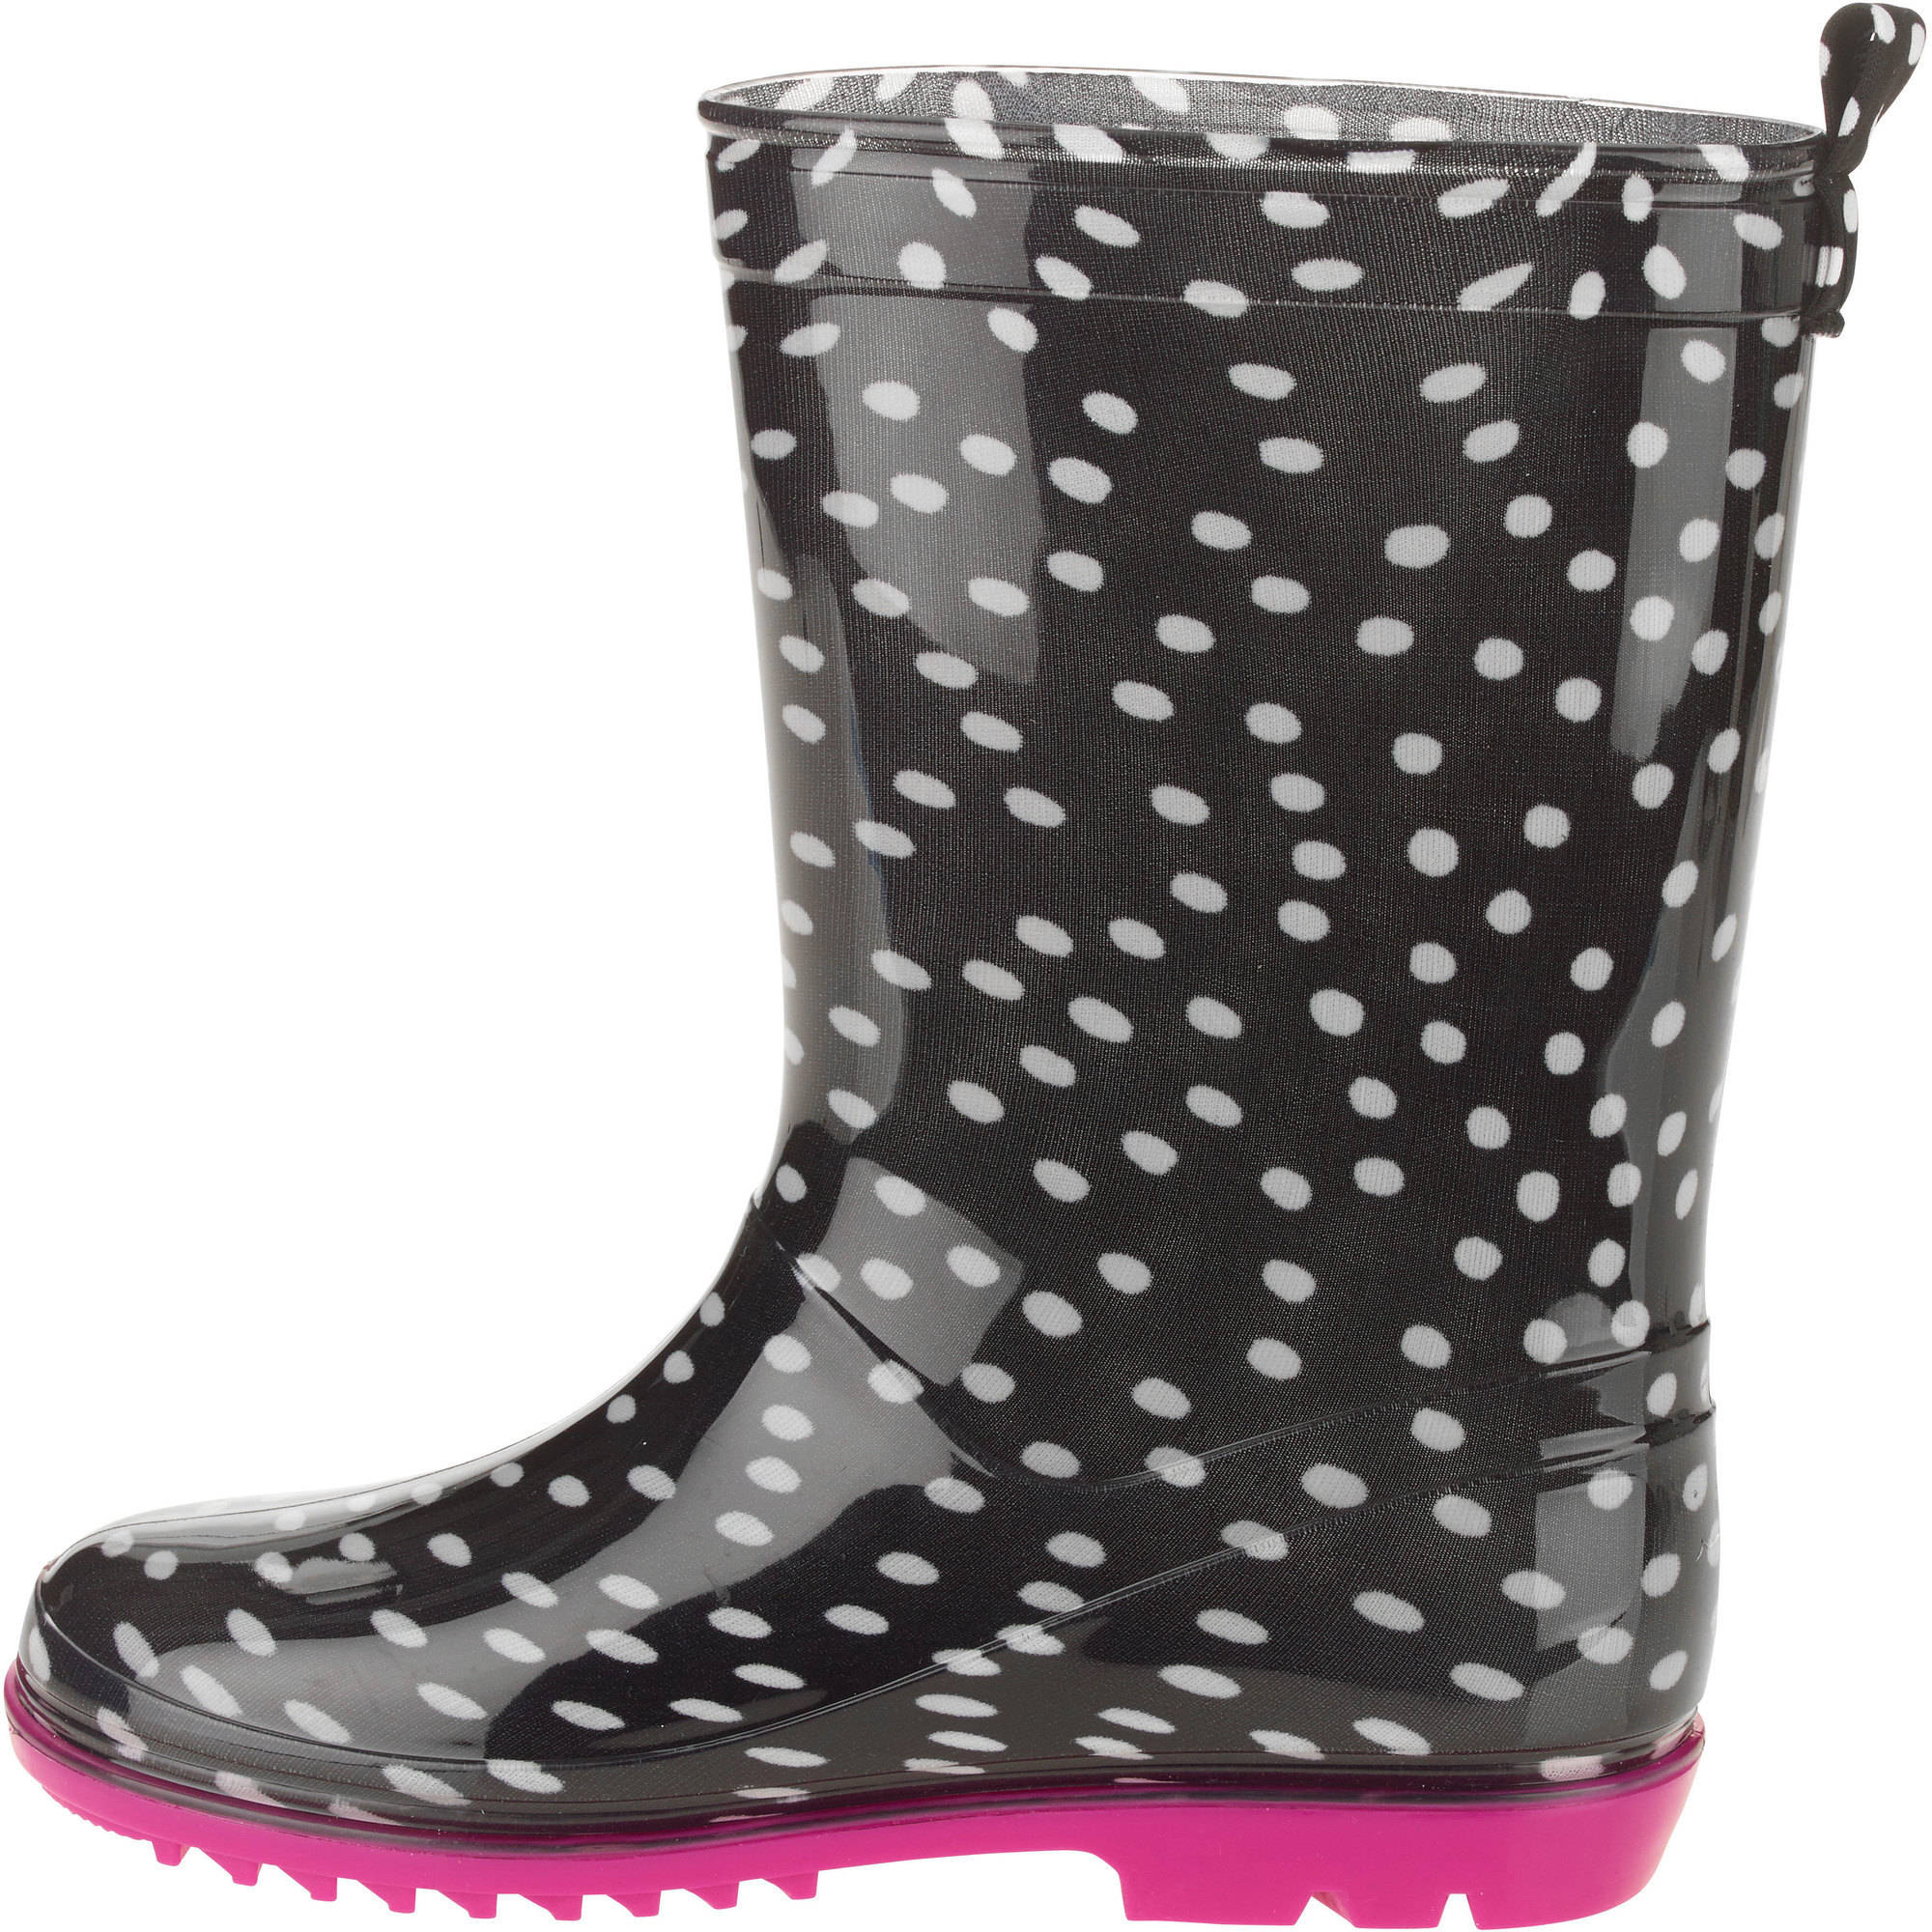 One Color Dots Printed Girls' Jelly Rain Boots - Walmart.com